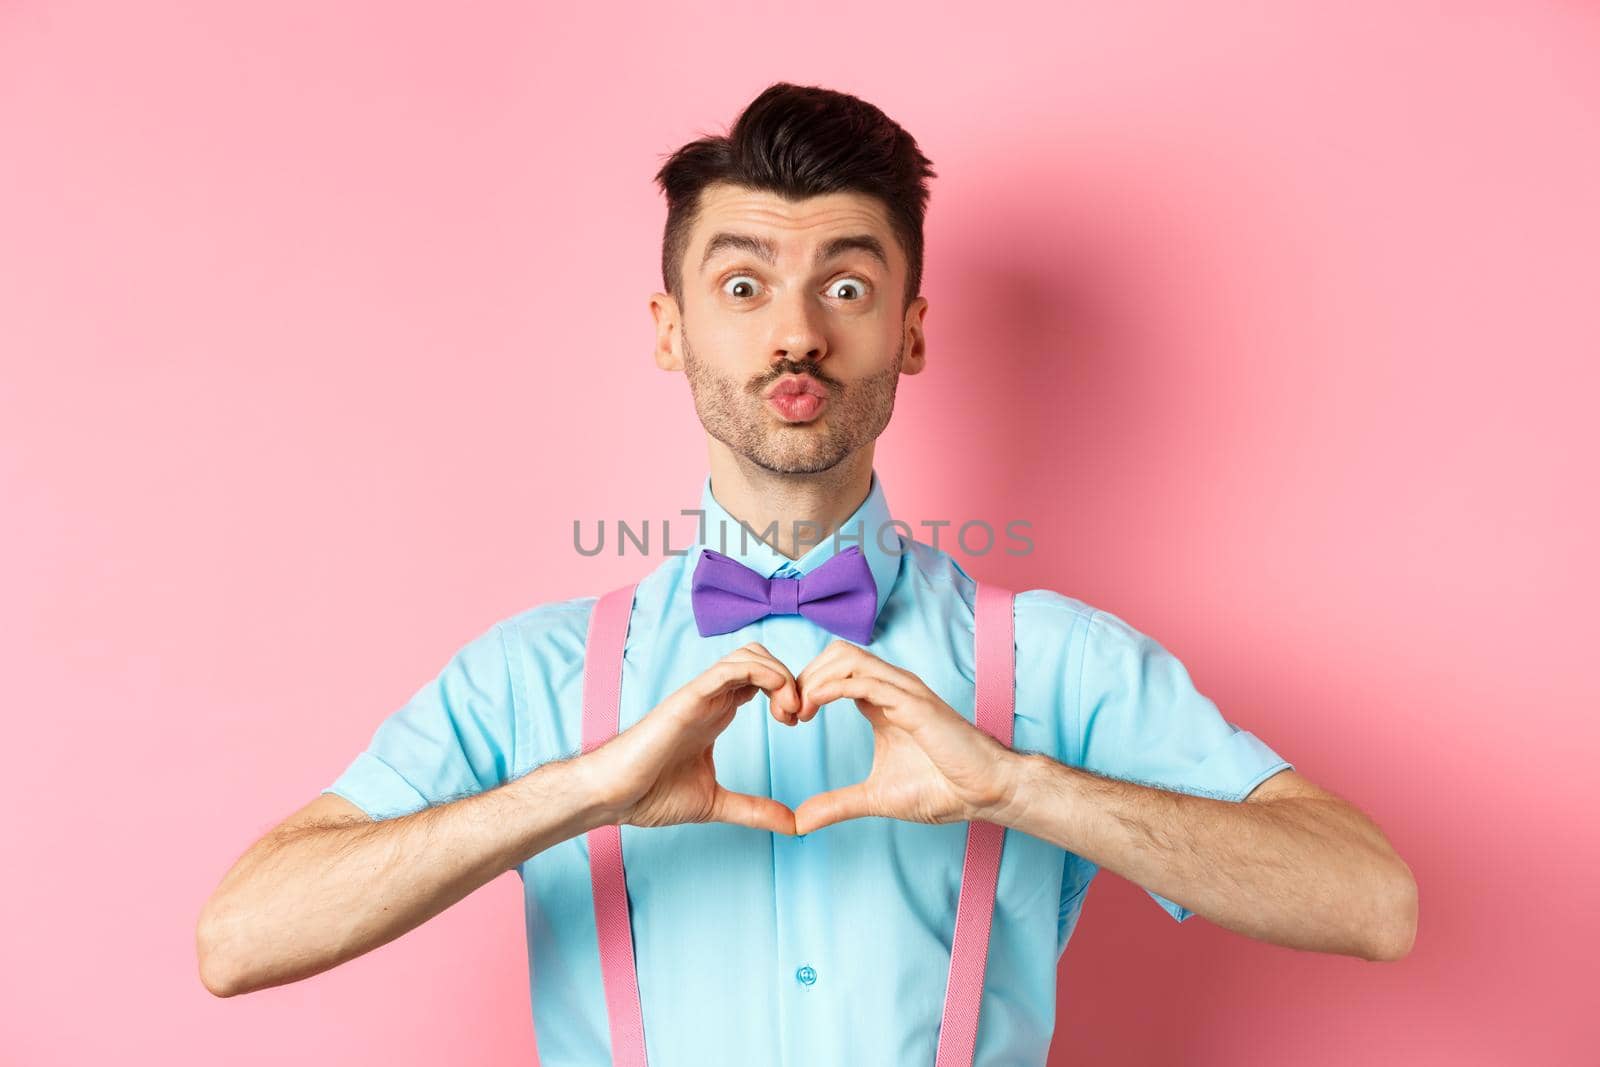 Happy Valentines day. Funny young man waiting for lovers kiss, pucker lips and show heart sign, I love you gesture, express feelings on date, pink background.